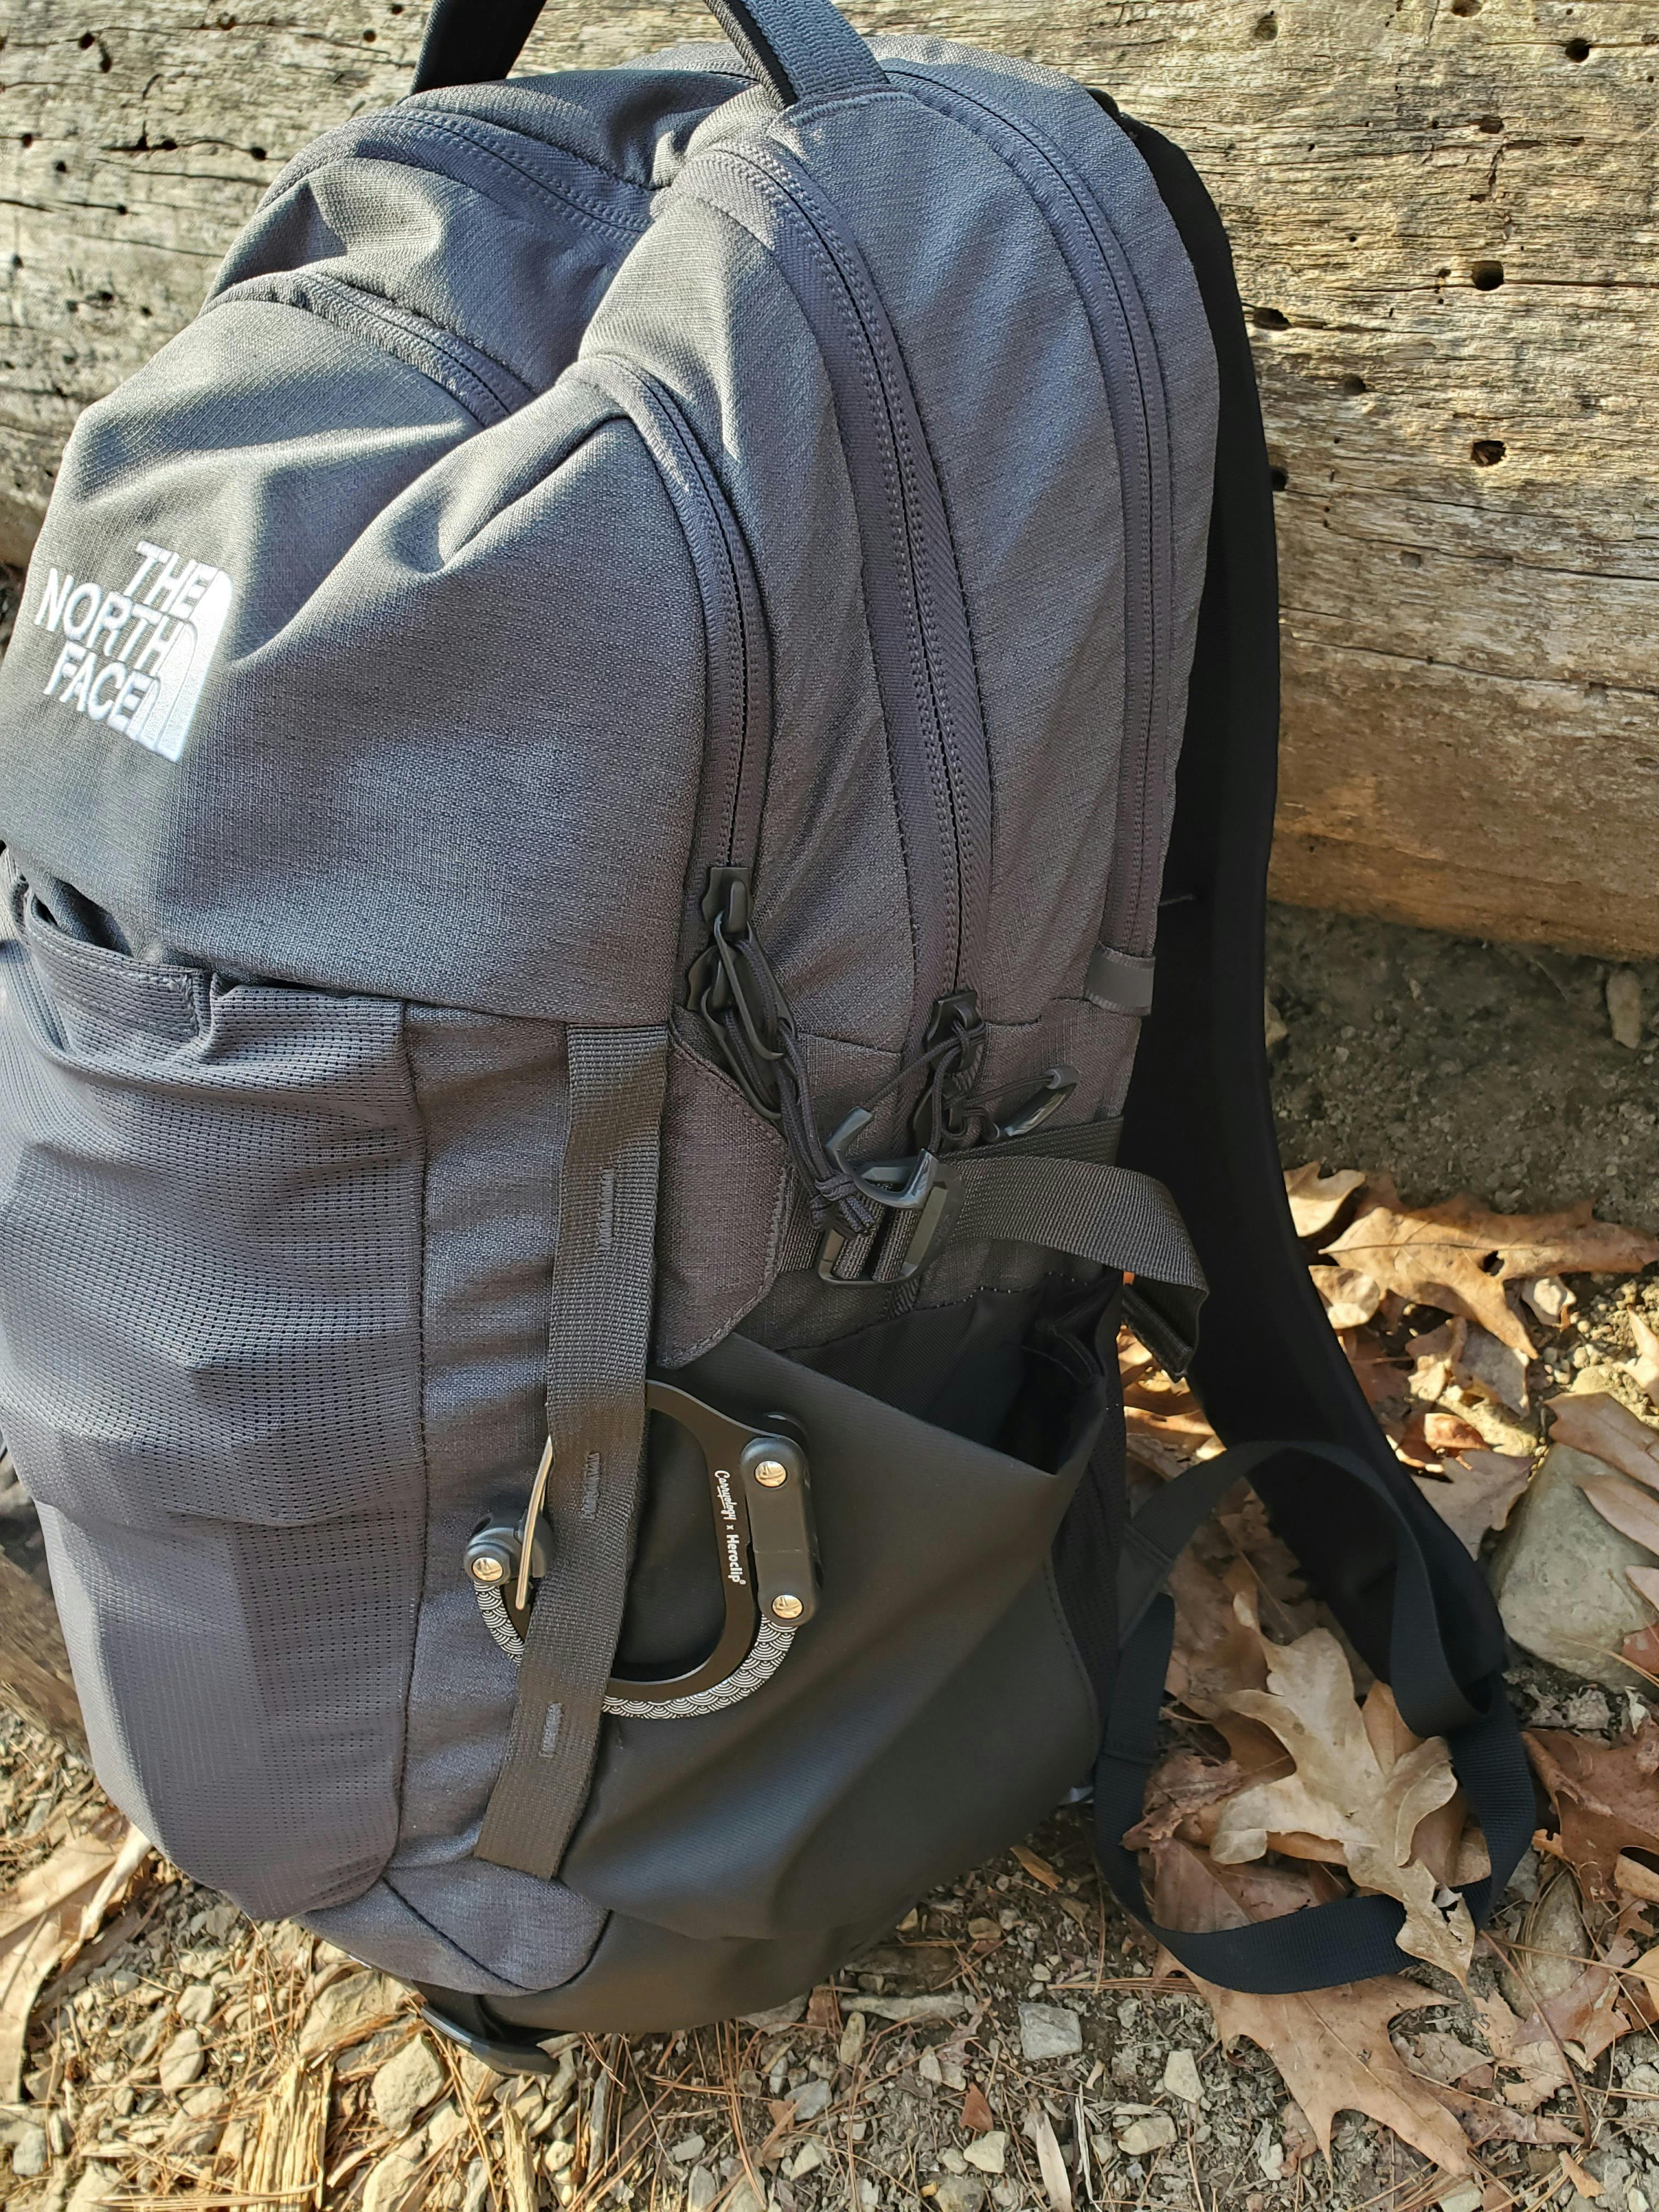 Side view of the The North Face Recon 30 Backpack.